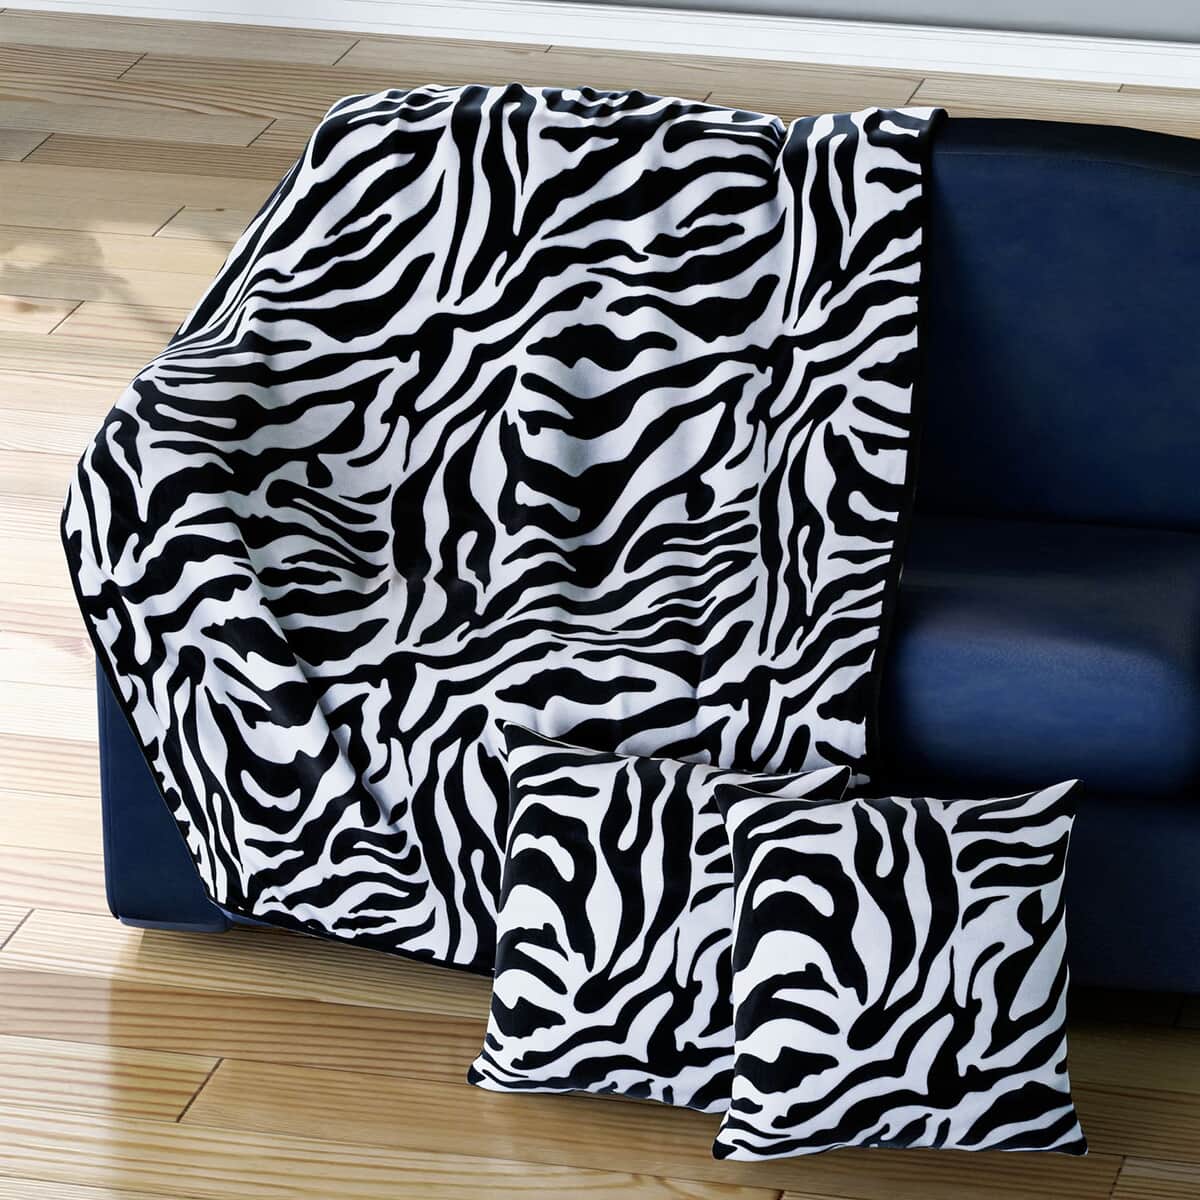 Homesmart Black & White Color Zebra Stripe Pattern Microfiber Coral Fleece Blanket (59.05x78.74) with 2 Cushion Covers image number 0